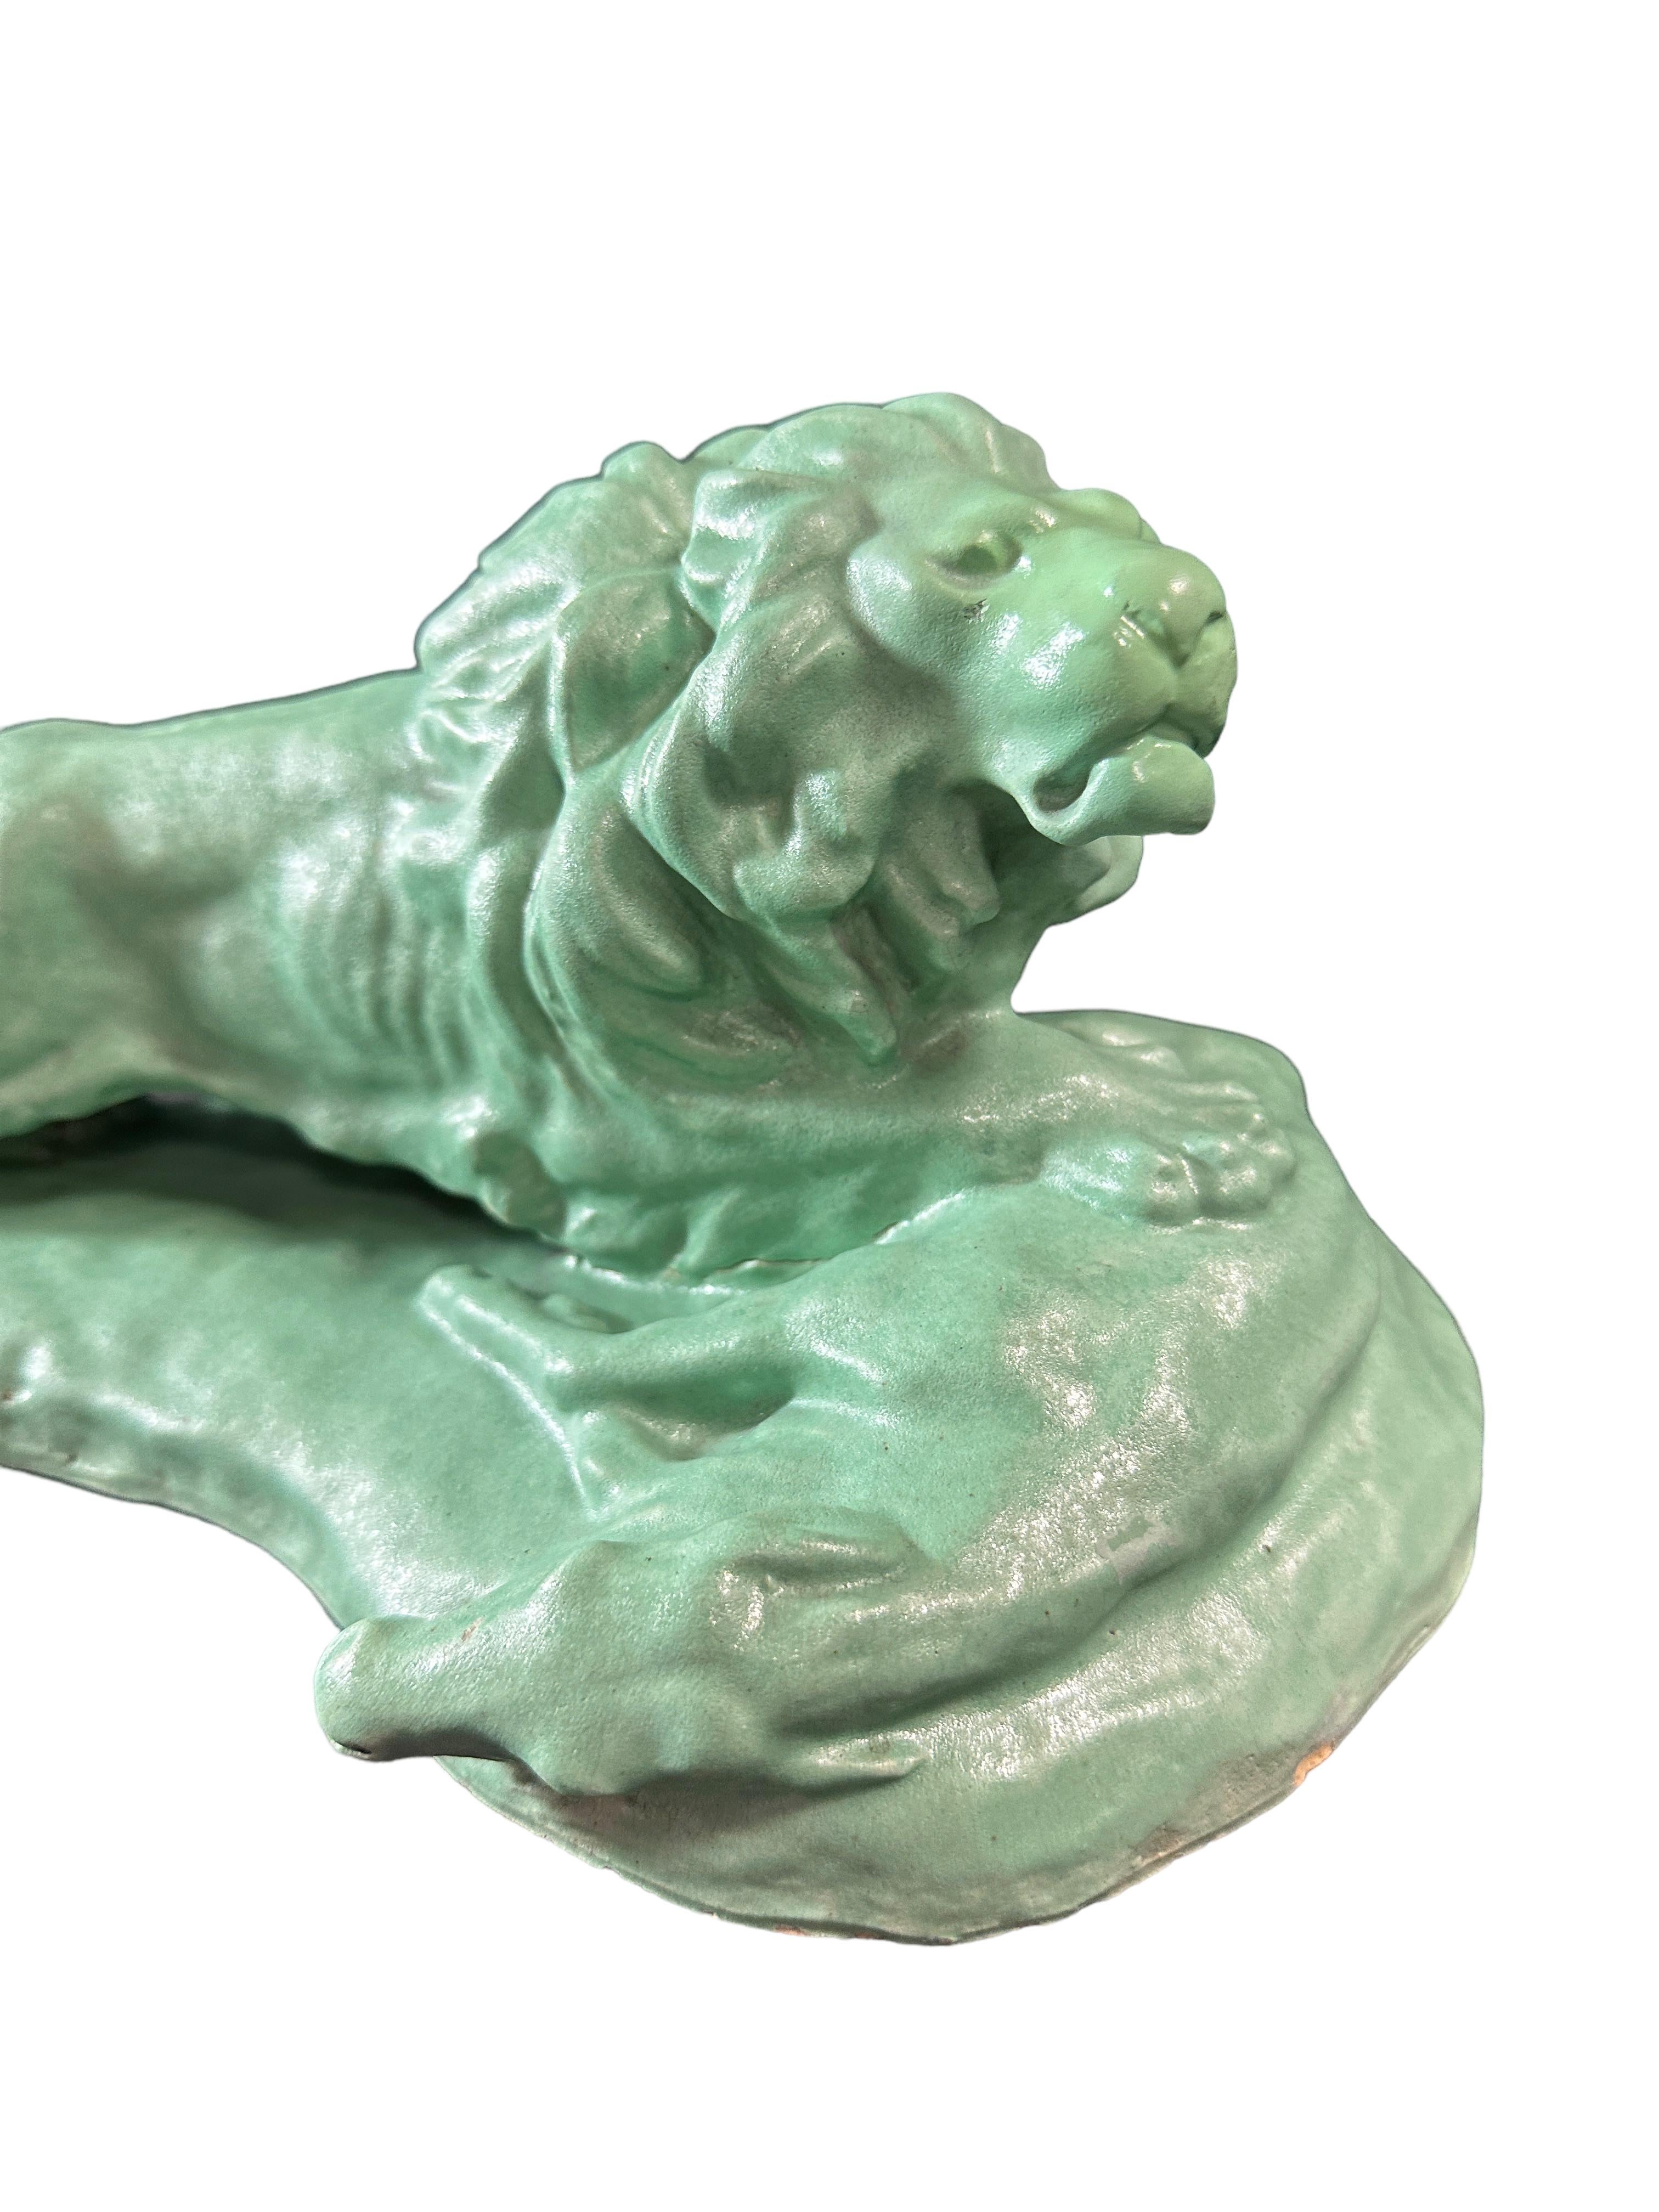 A beautiful vintage ceramic glazed lion sculpture. It is marked Jul. Singer, and dated 1937. Small chip at the base like seen in the pictures. found at an Estate Sale in Vienna, Austria. A nice addition to any room. Looks great as a center piece on